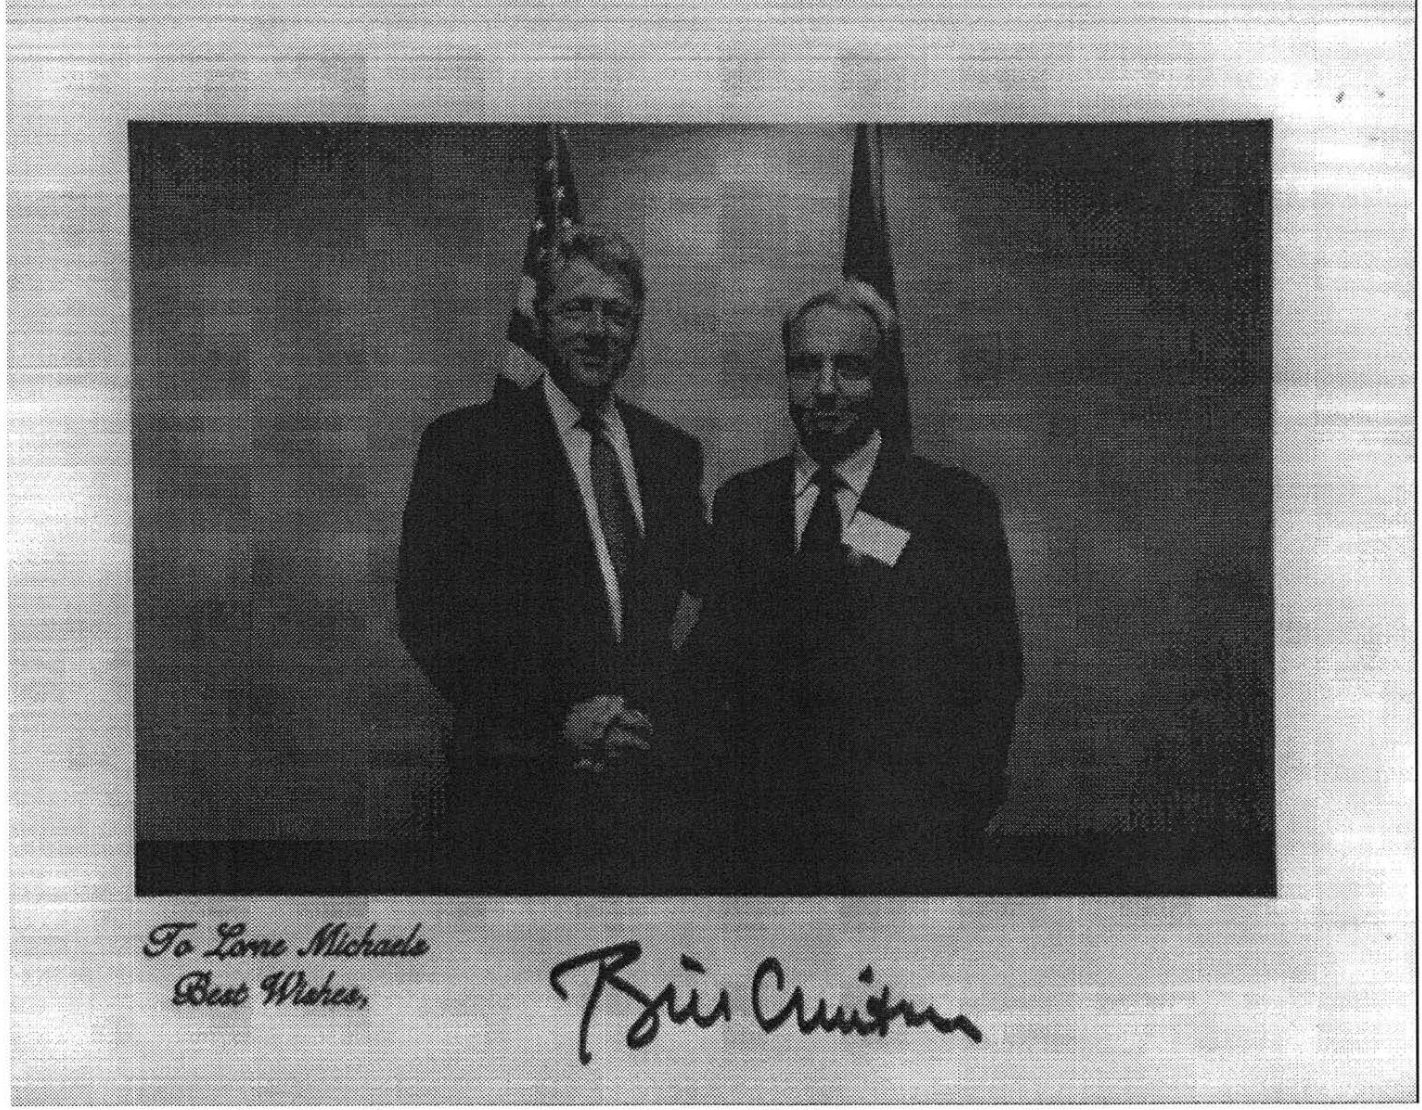 A holiday card, signed by Bill Clinton with message "To Lorne Michaels / Best wishes," featuring a picture of Clinton and Michaels holding hands in front of an American flag.